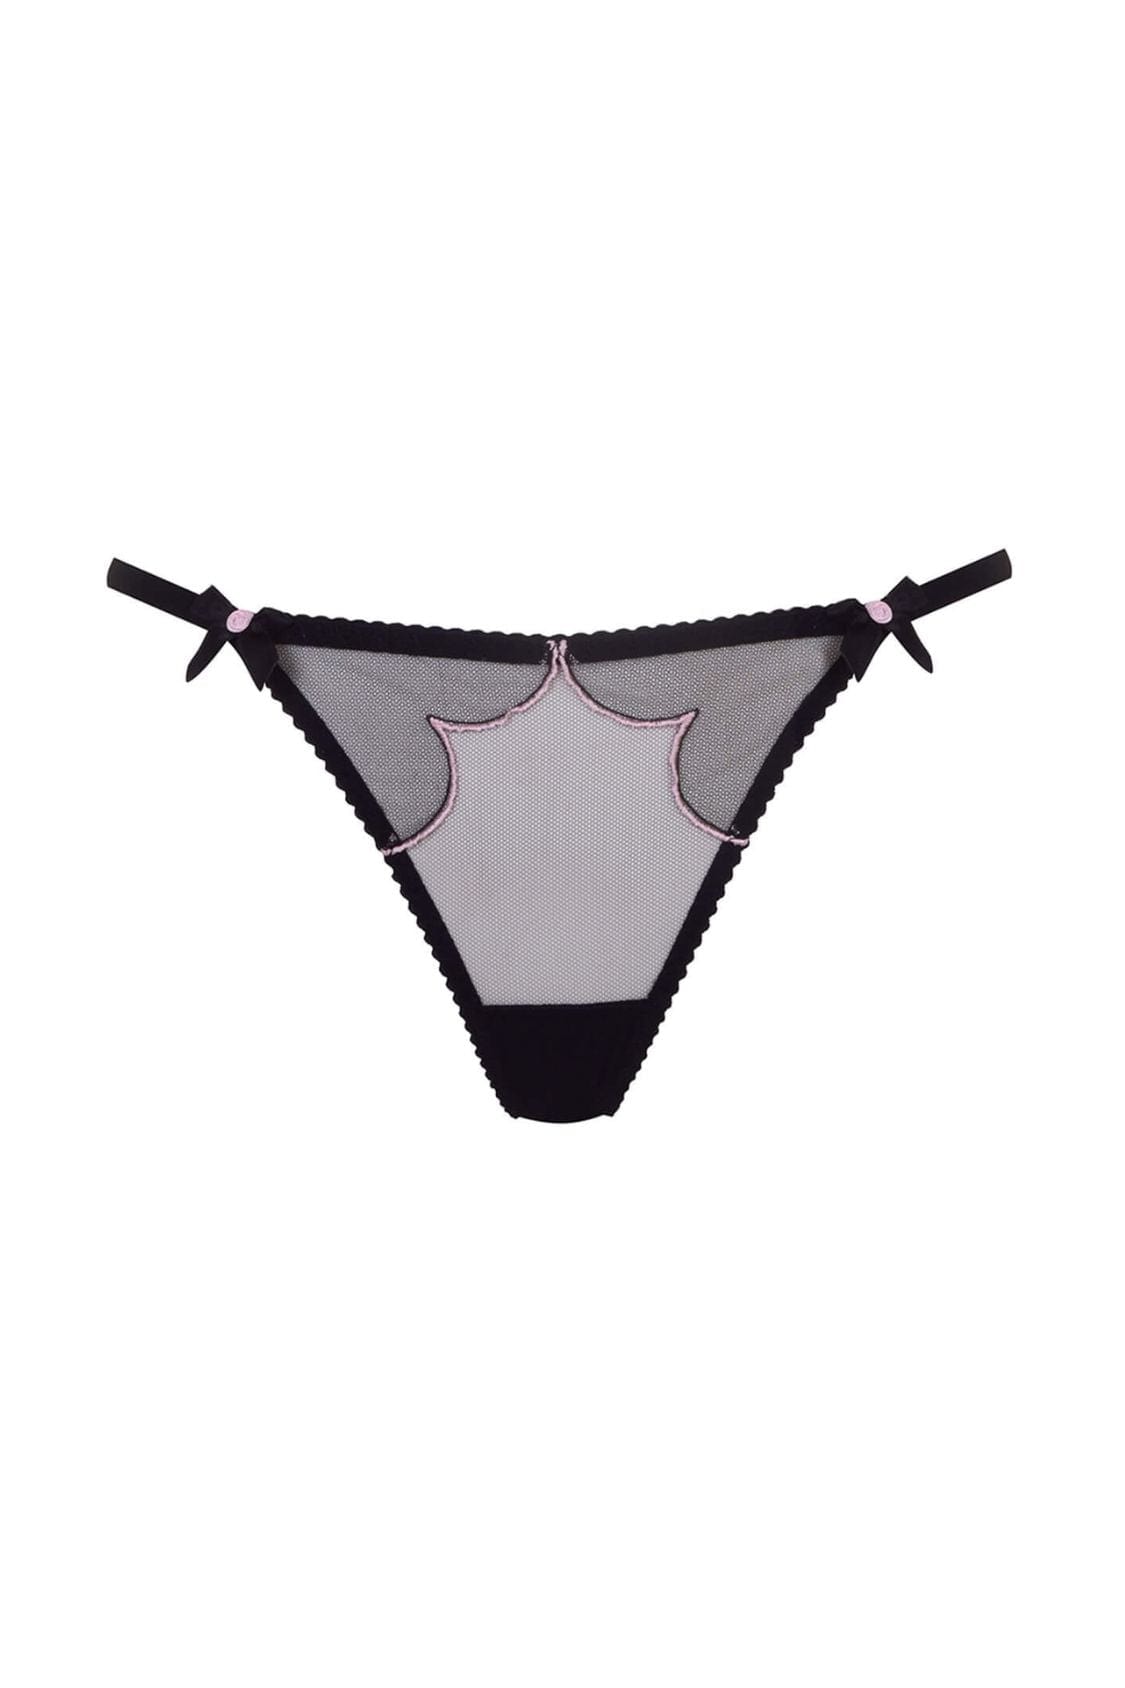 Agent Provocateur Thong Lorna Thong - Black/Pink